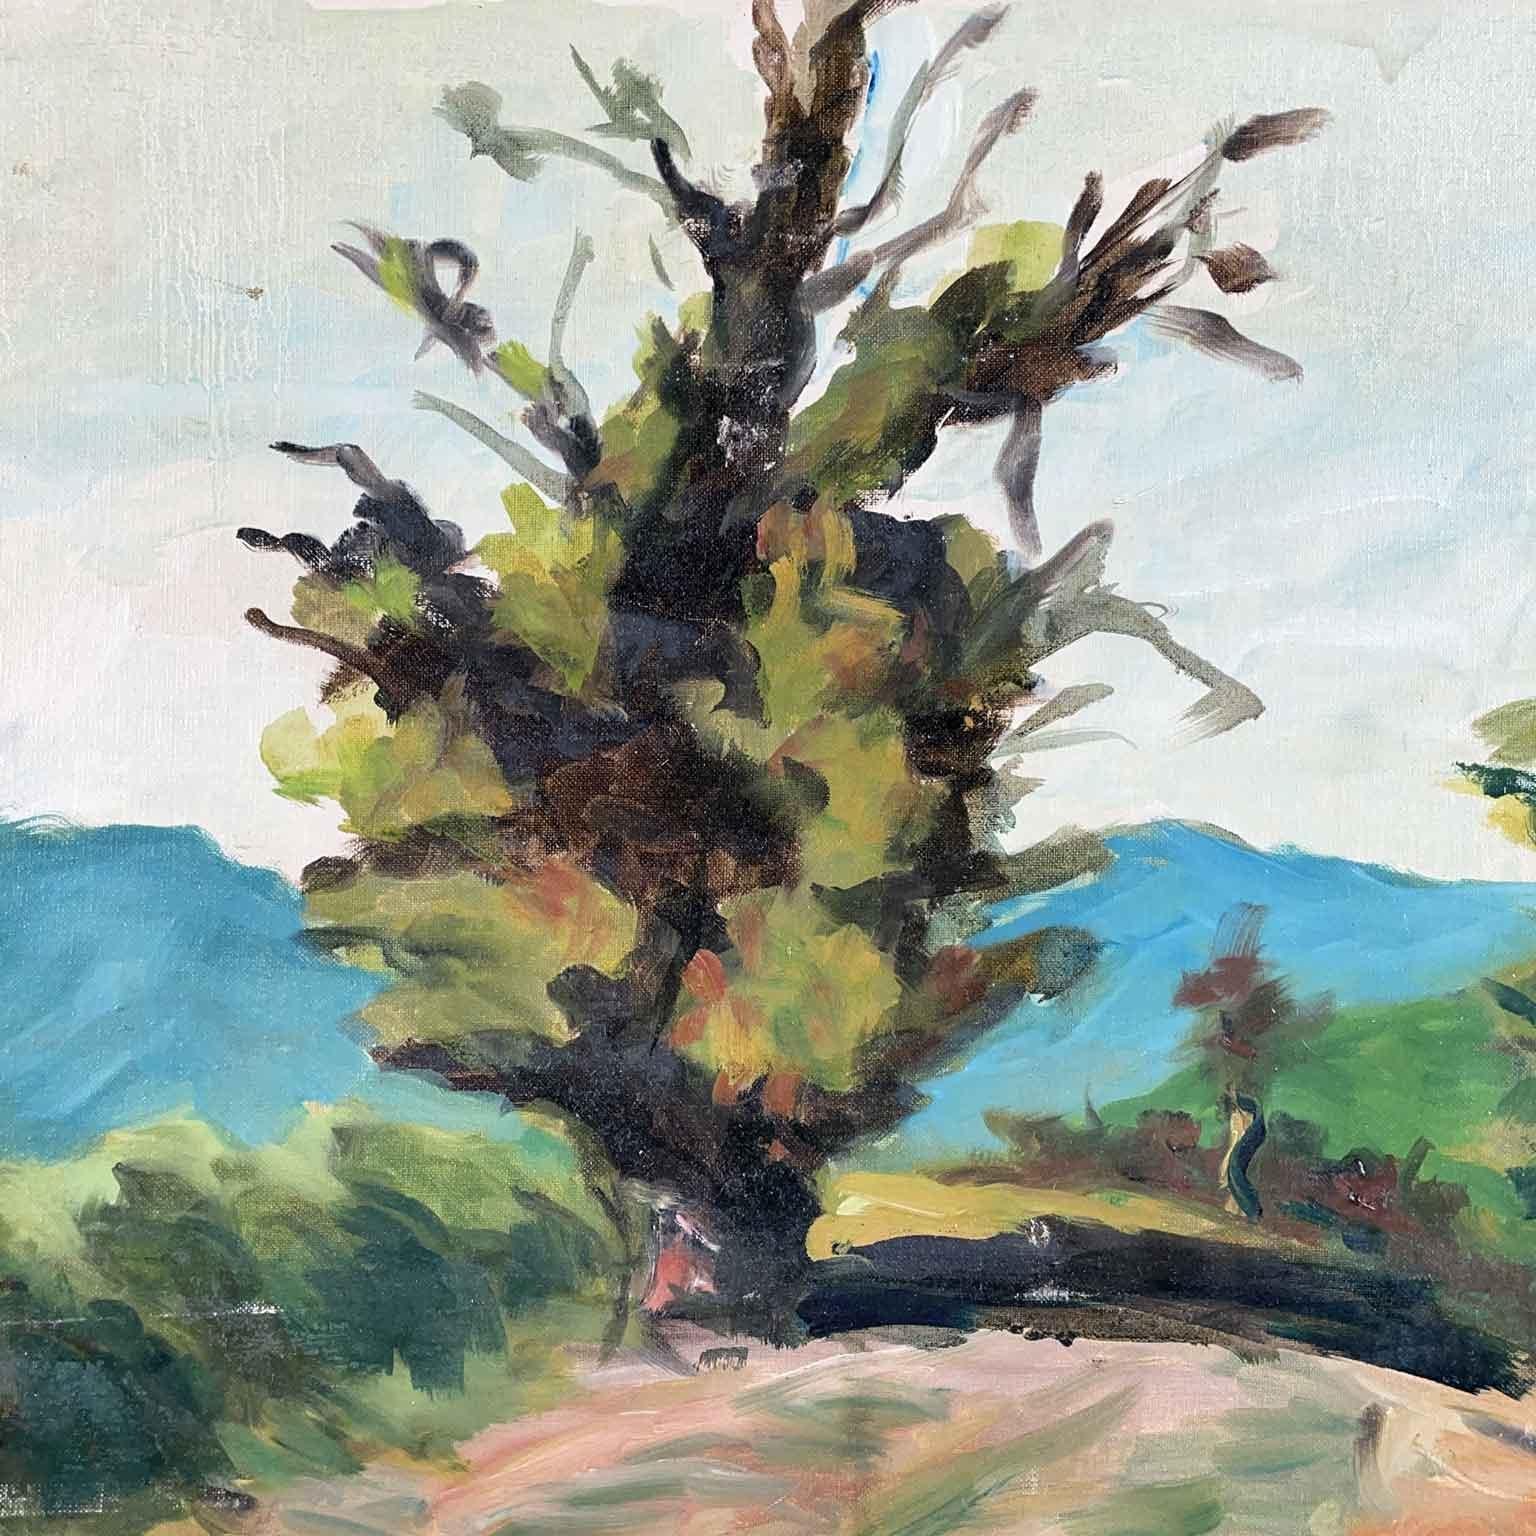 Italian landscape with trees on a hill, oil on canvas cardboard unfraimed painting signed Scaroni at the lower left by the Italian artist Annibale Scaroni born in Lombardy, Brescia 1891 and died in Milan in 1983.
The back of this work shows author